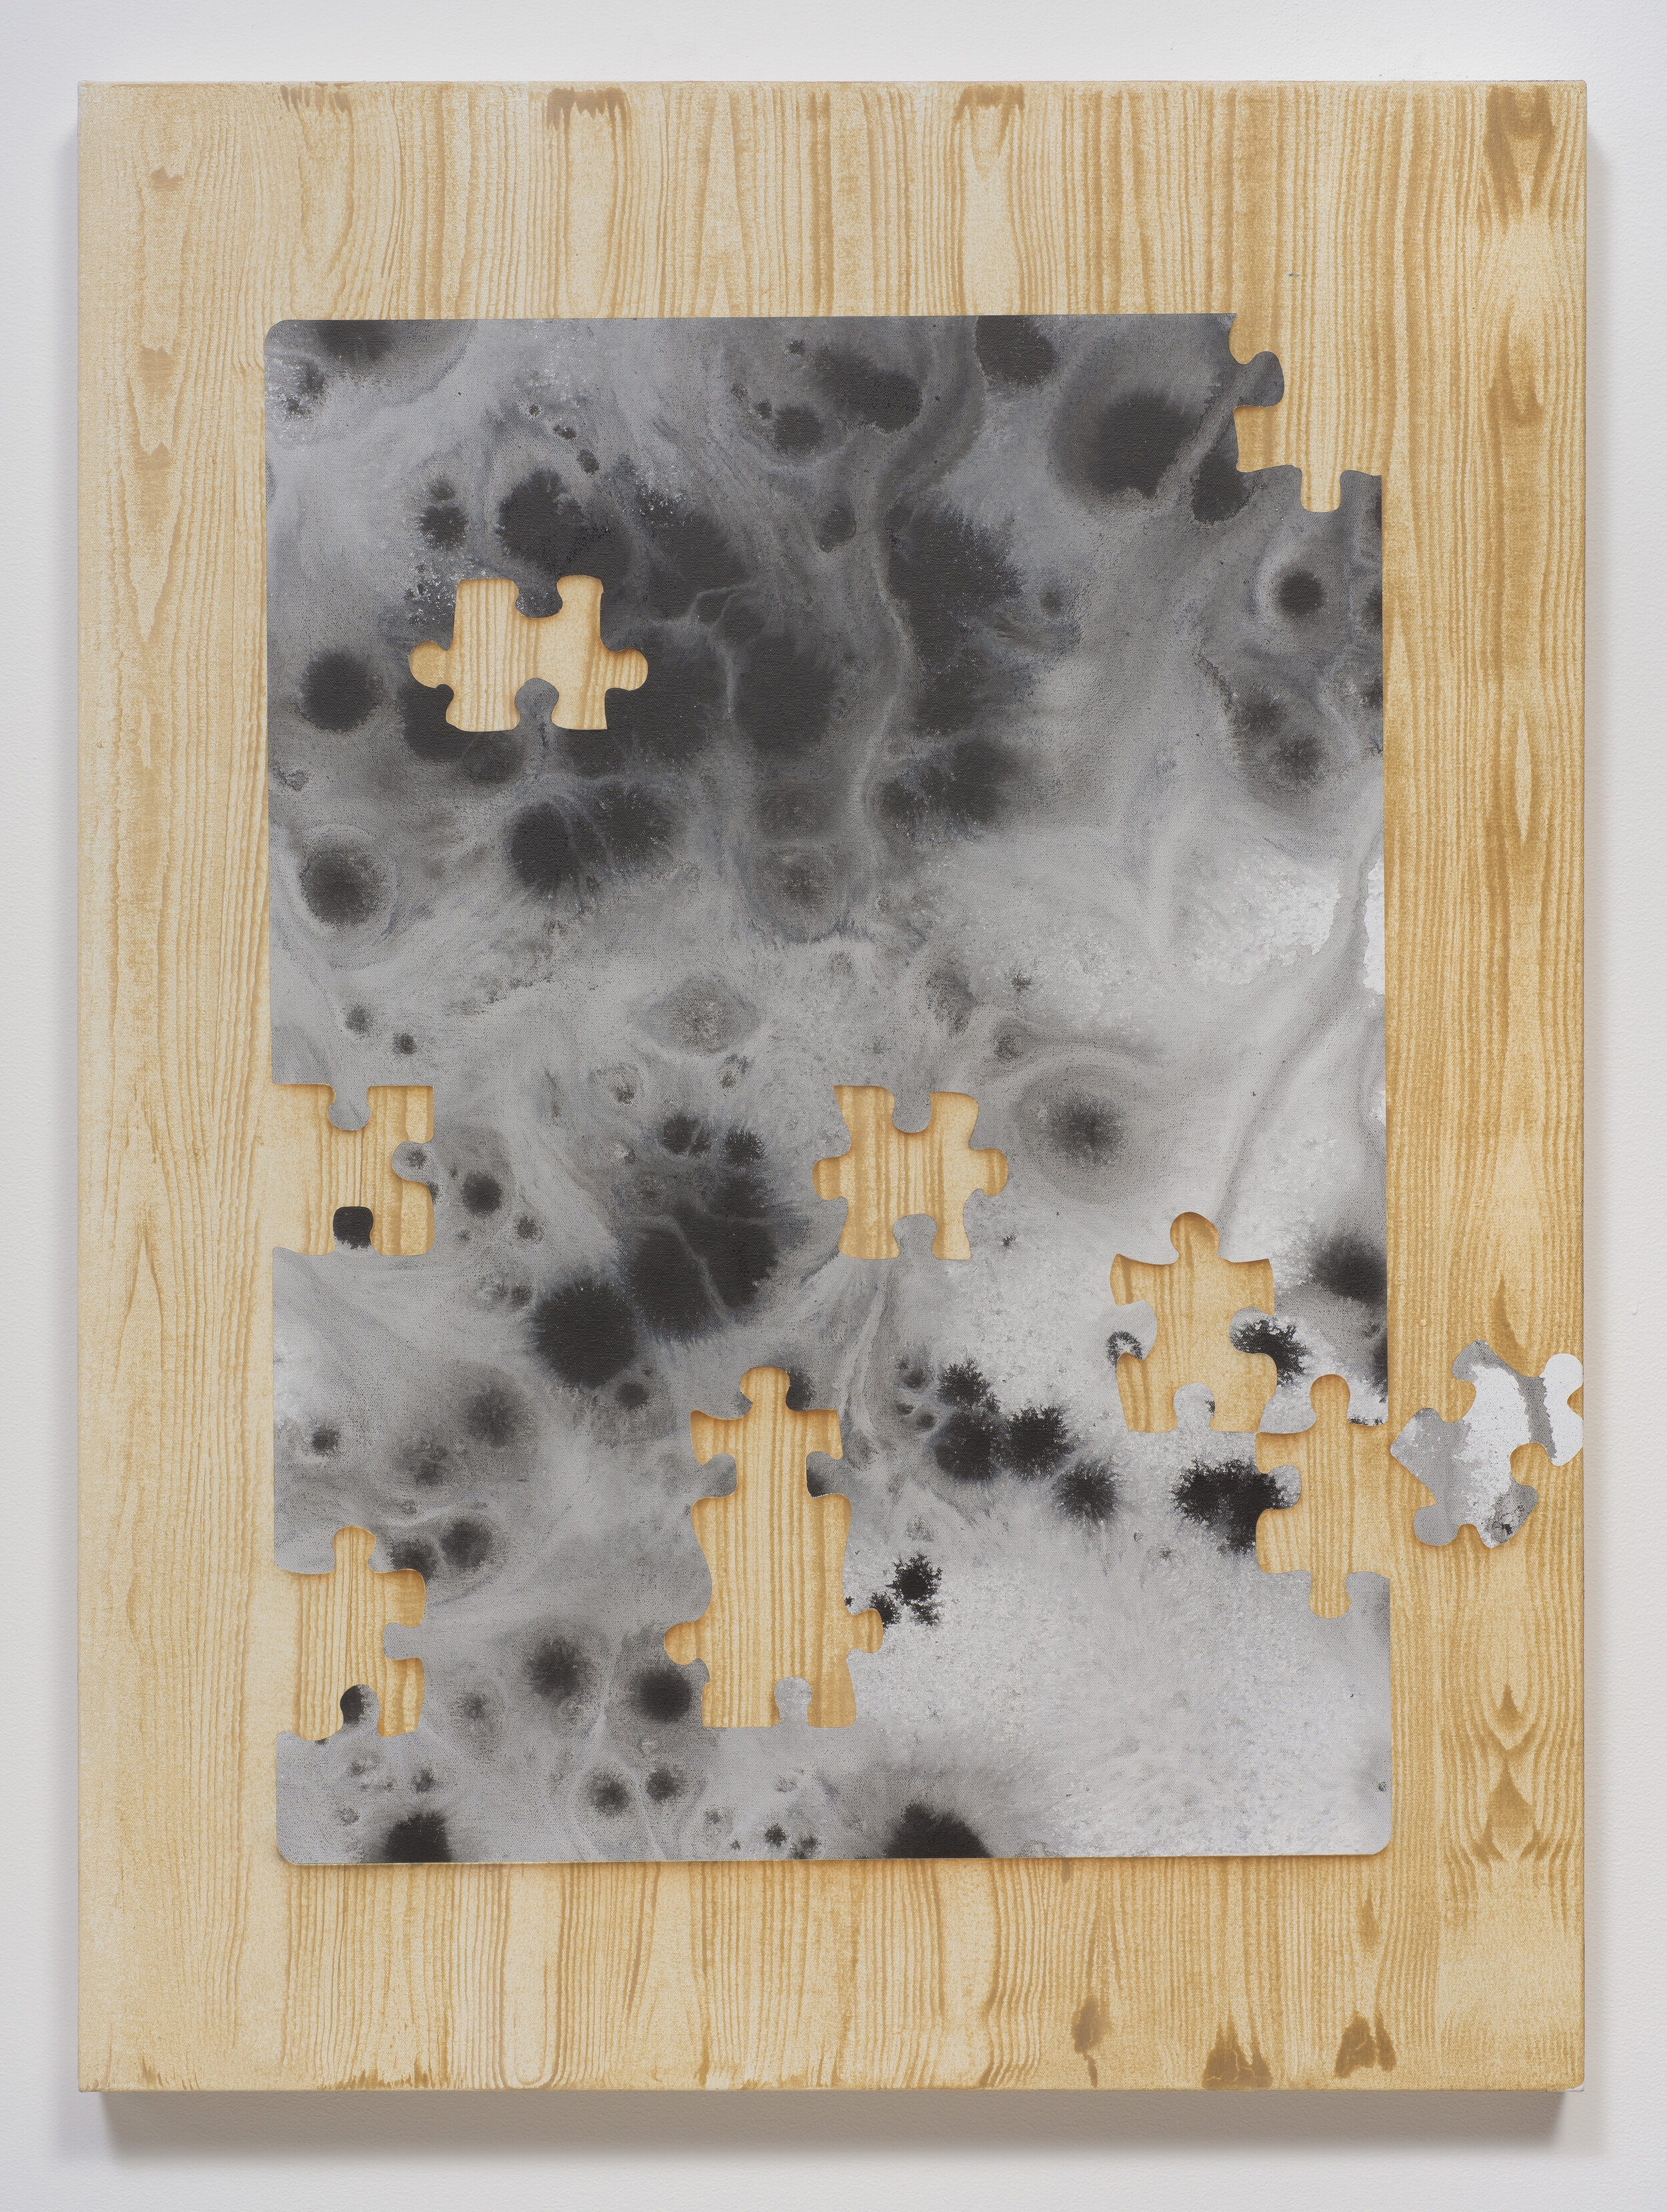   Untitled Painting with Puzzle Motif,  2014. Acrylic on canvas. 40 x 30 inches 